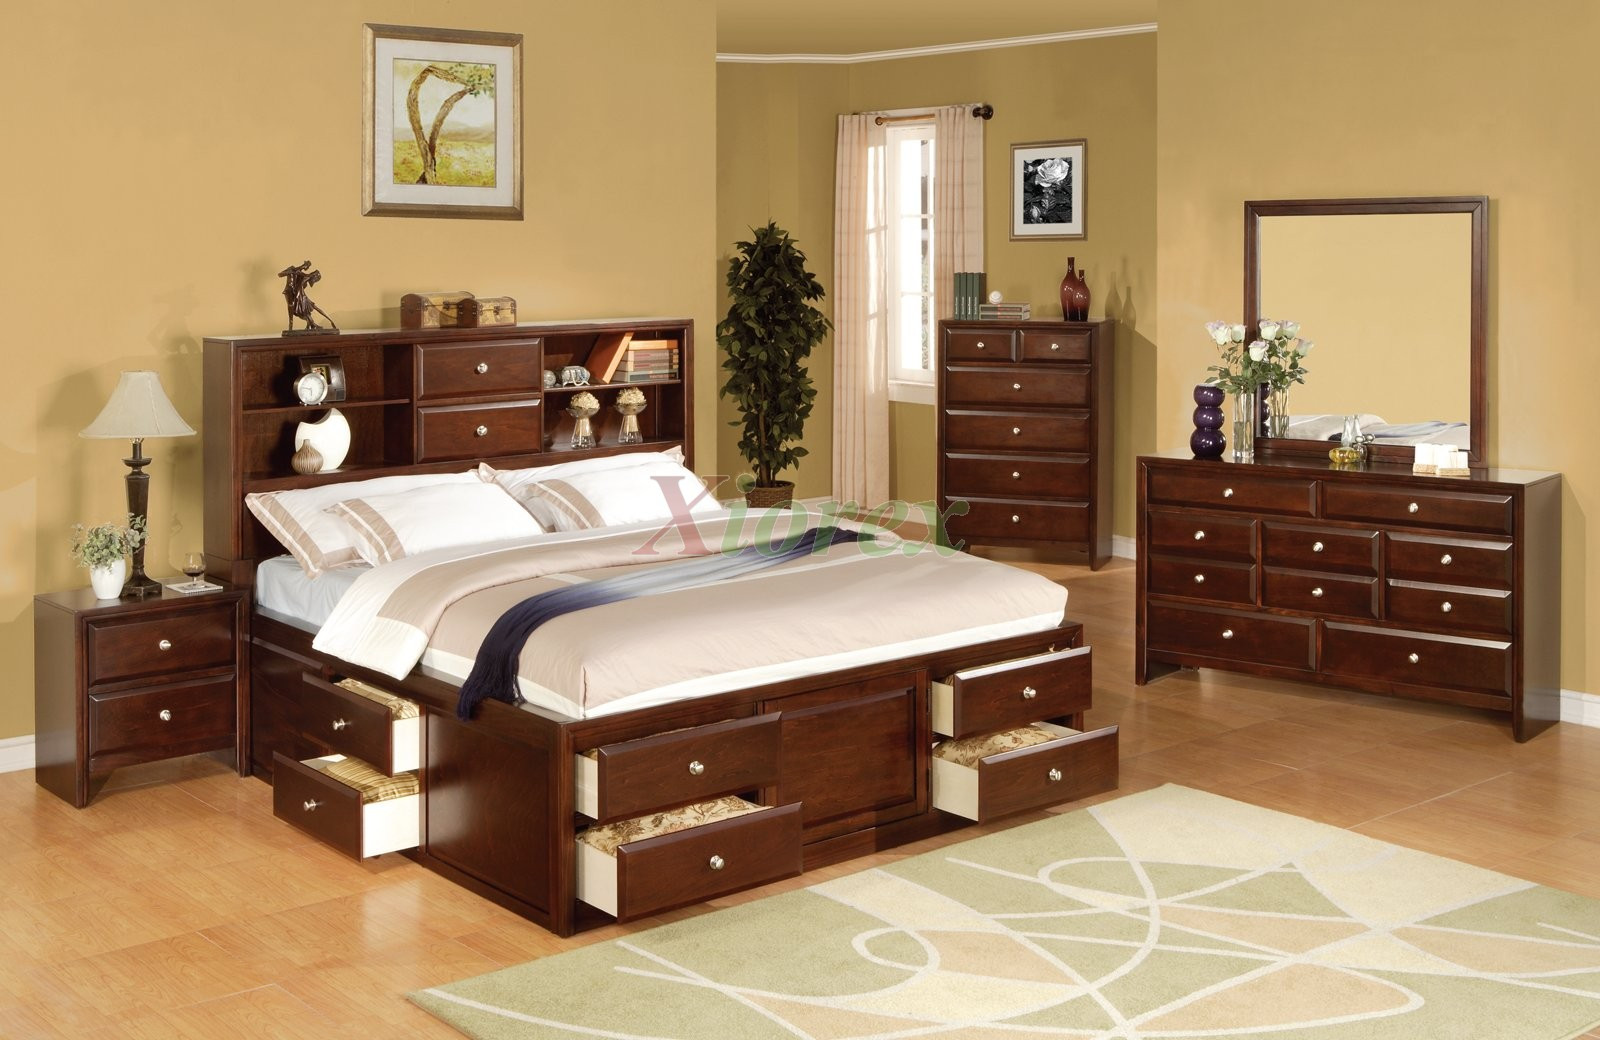 Storage Bedroom Furniture
 A Lot of Bedroom Storage Ideas for the Better yet Well